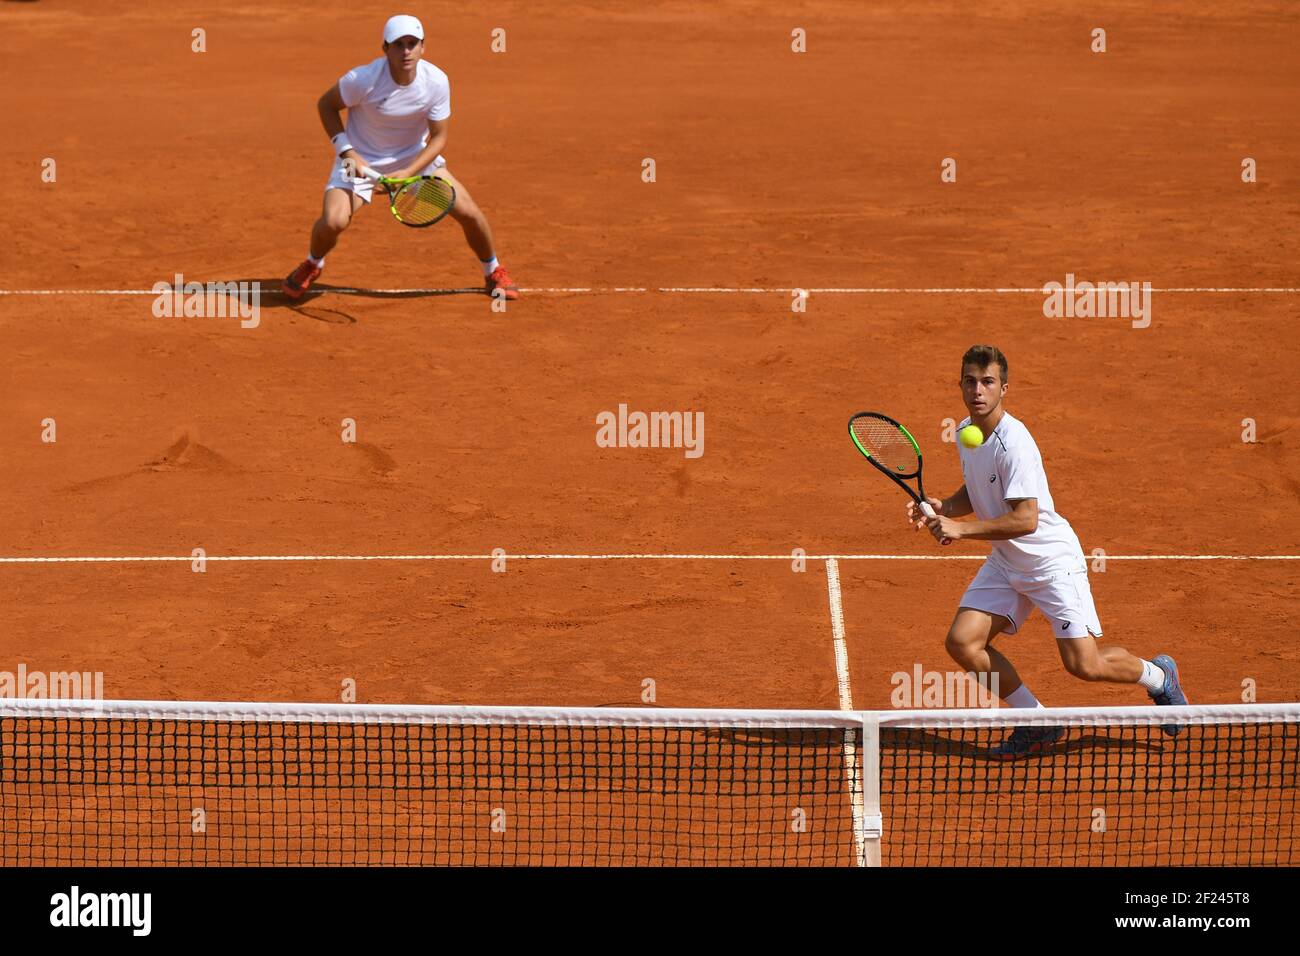 Hugo Gaston and Clement Tabur (Fra) compete and win bronze medal in men's doubles tennis during the Youth Olympic Games at Buenos Aires in Argentina, Day 8, October 13, 2018, Photo Philippe Millereau / KMSP / DPPI Stock Photo